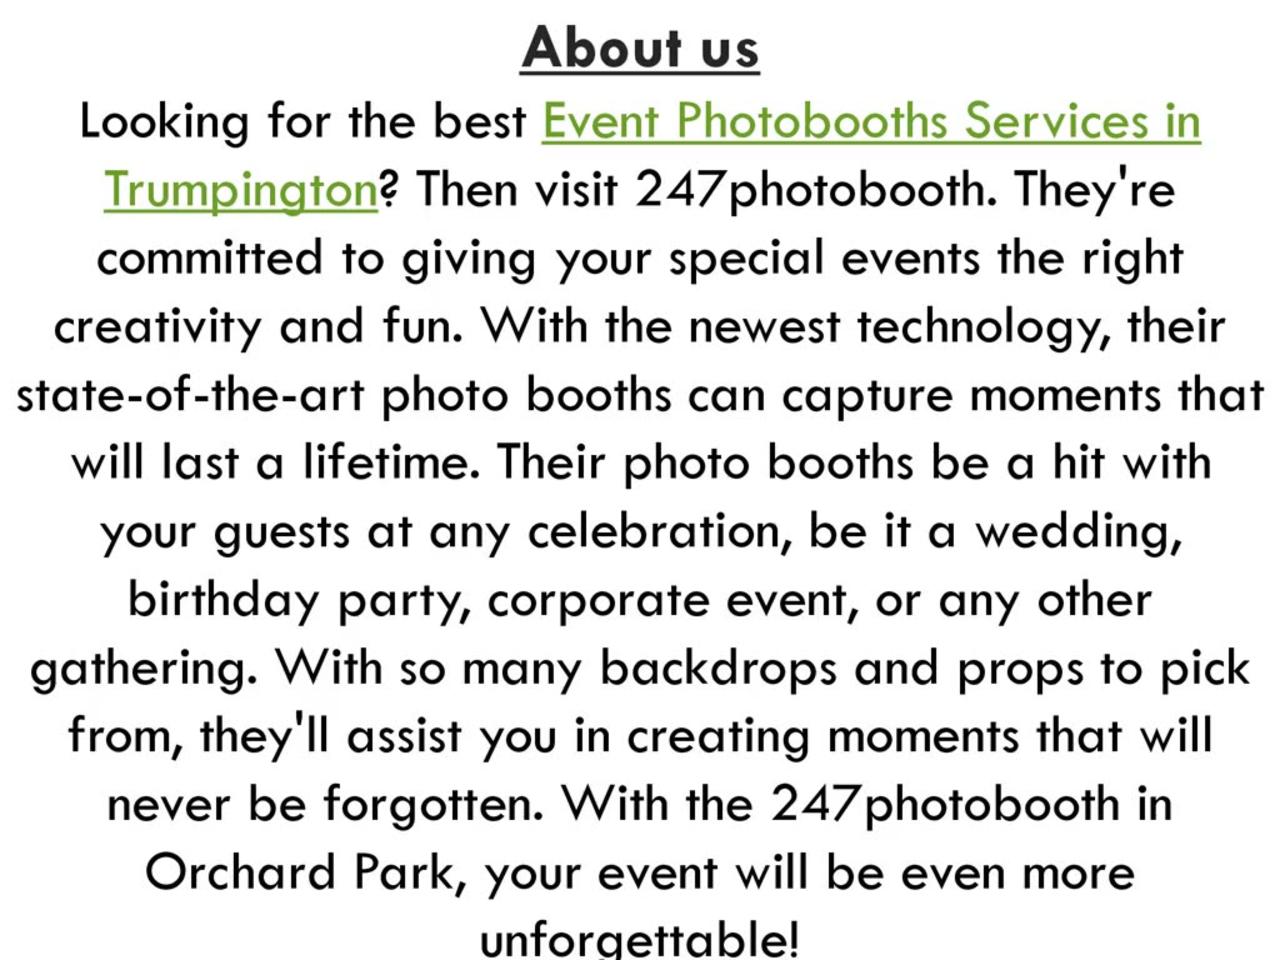 Get the best Event Photobooths Services in Trumpington